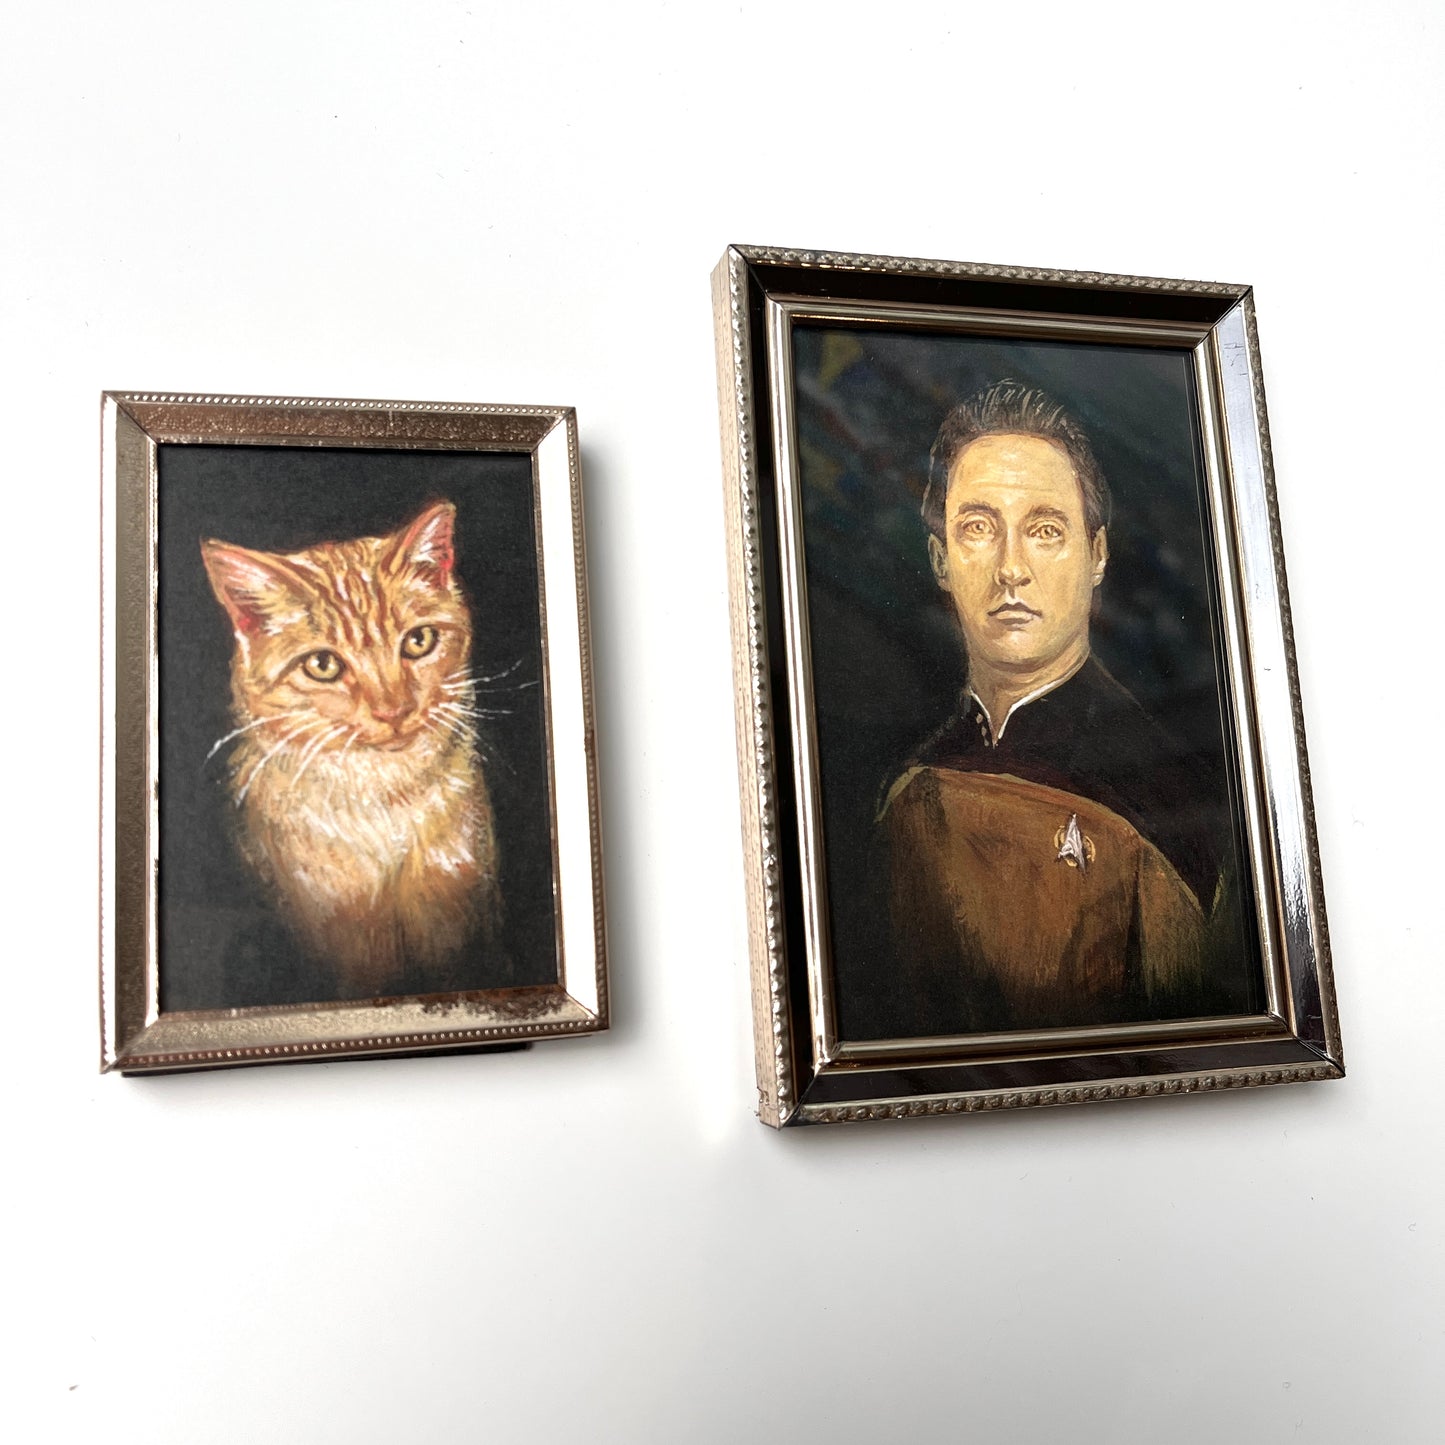 My Cat and I - 2x PRINTS in vintage brass frames